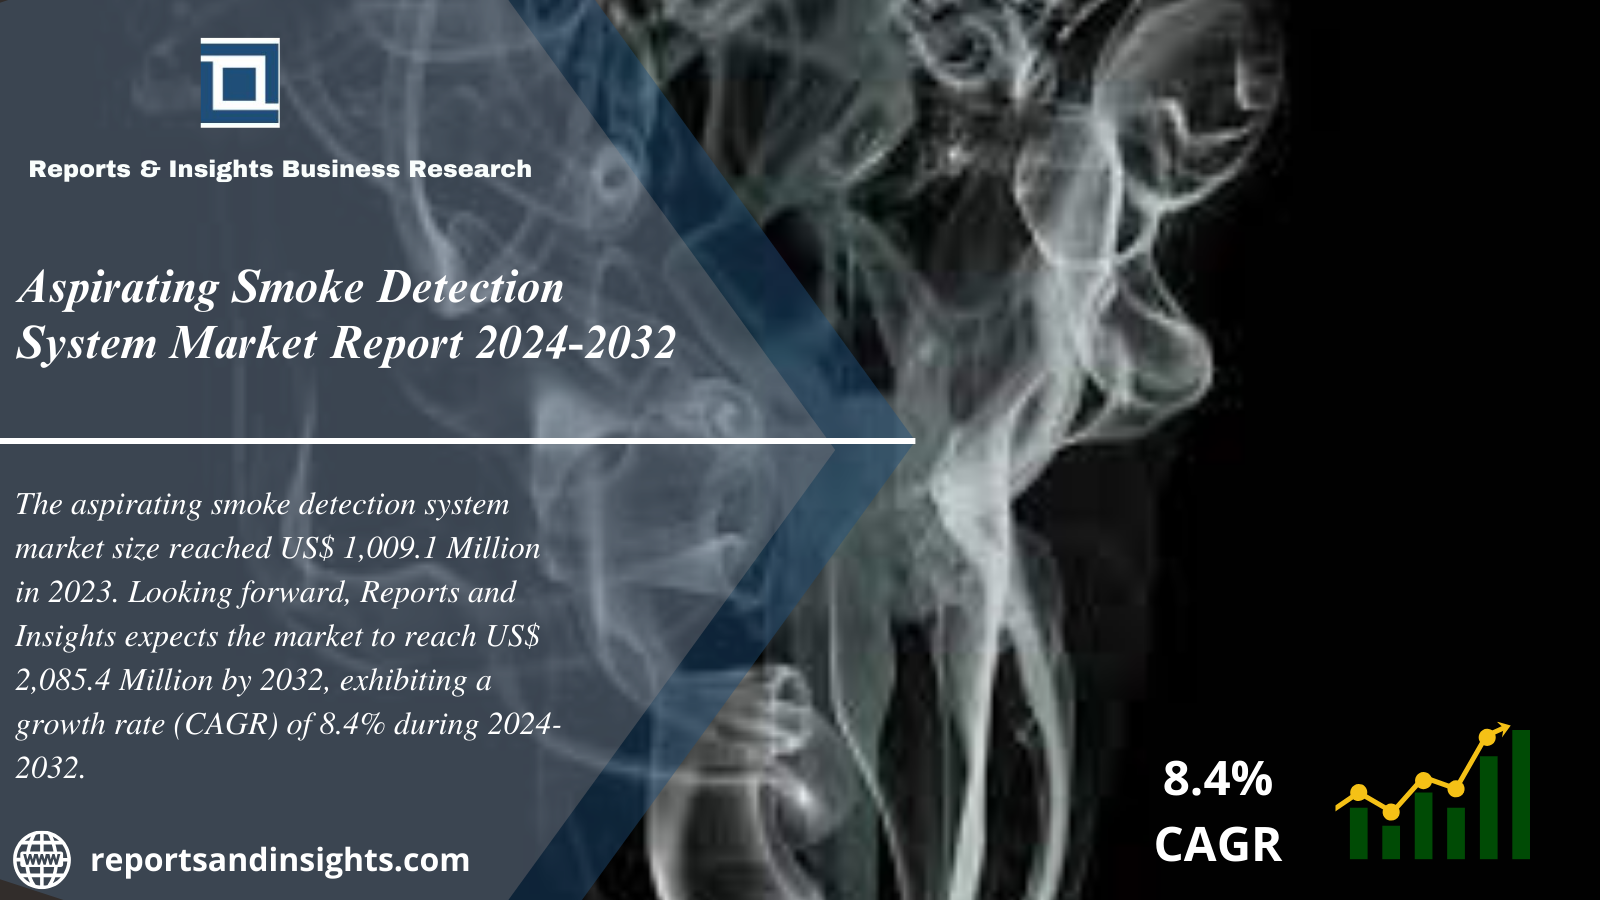 Aspiratin Smoke Detection System Market 2024-2032: Trends, Share, Size, Growth n' Leadin Key Players